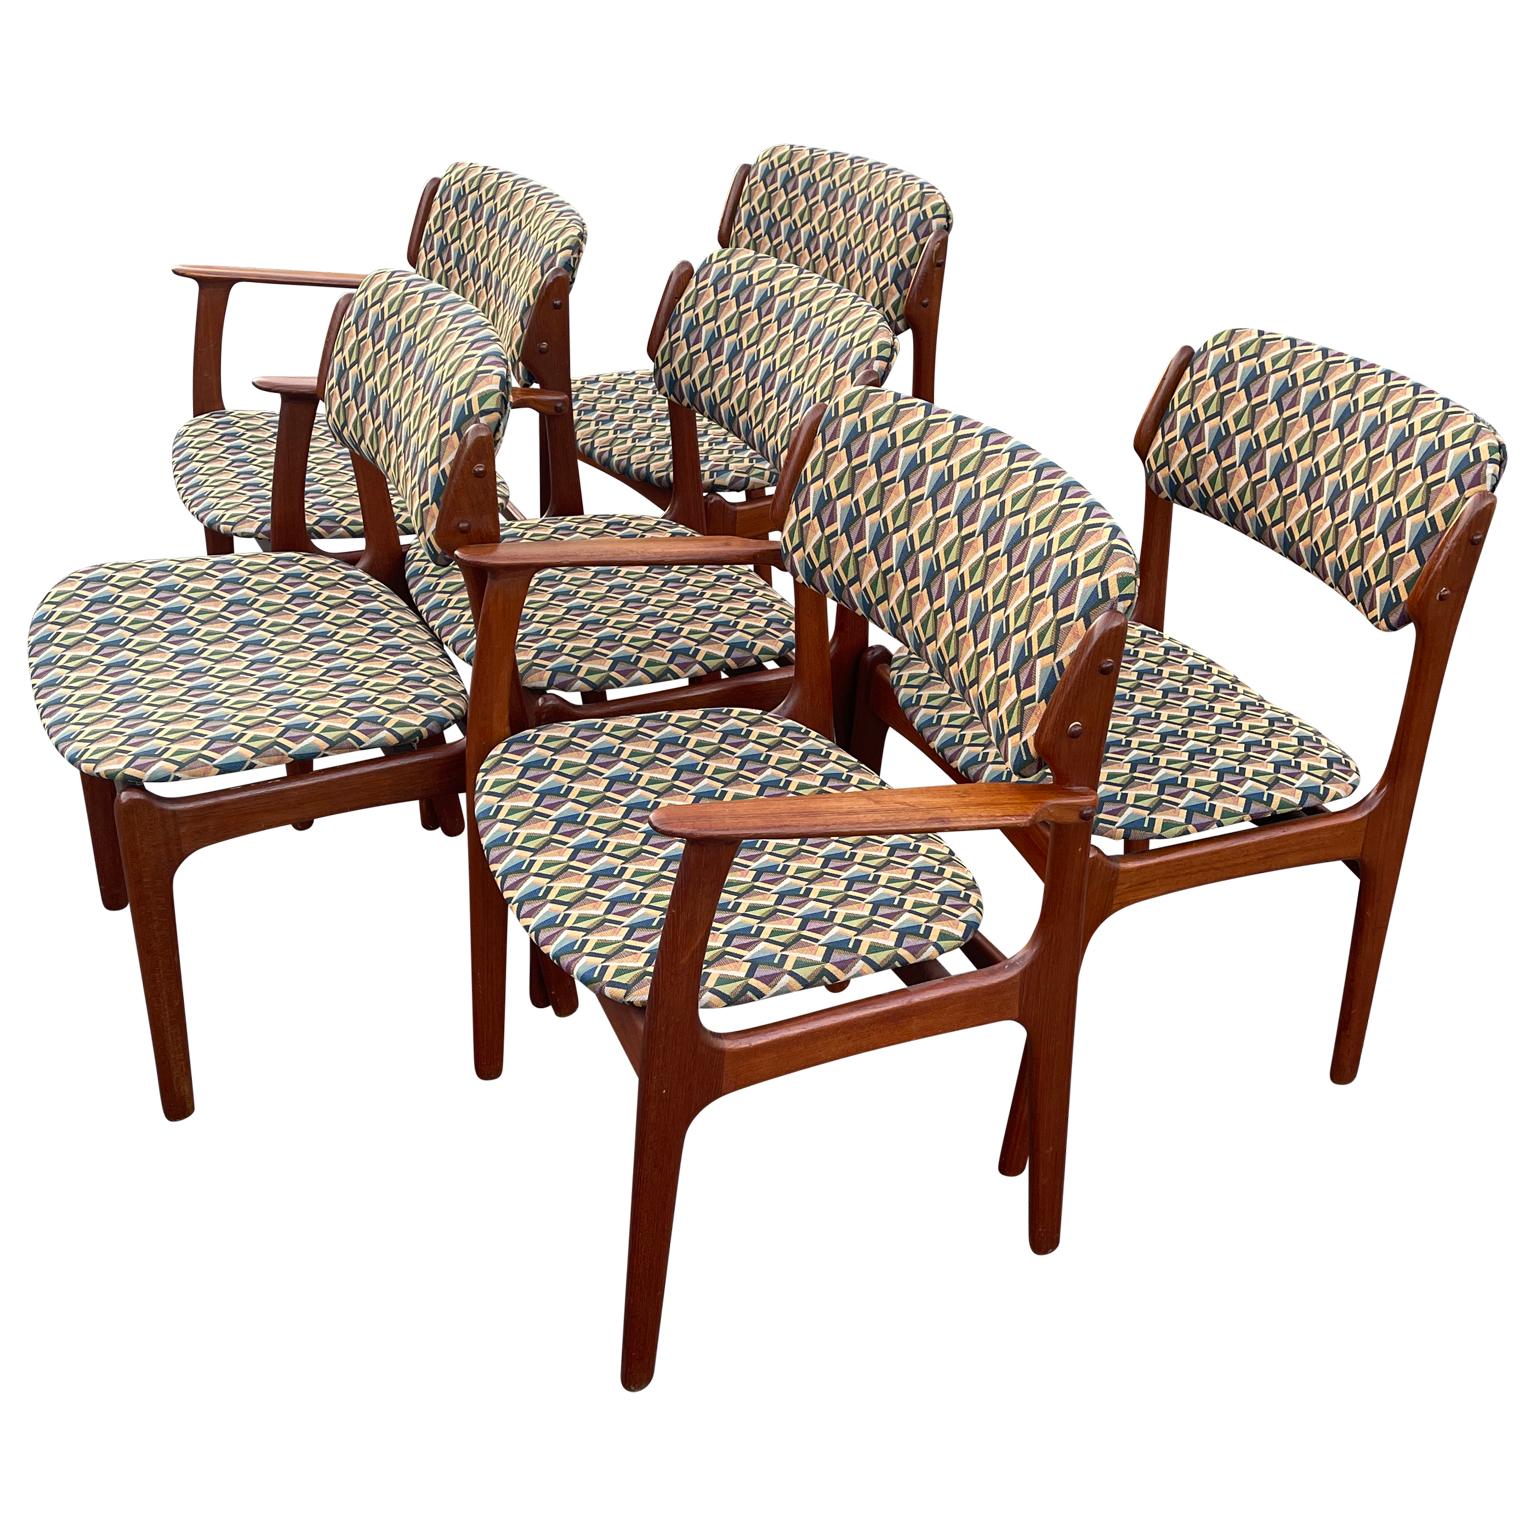 Set of six Danish Scandinavian Modern dining chairs, circa 1960. This beautiful set are designed by Erik Buch and made by Domus Odense Maskinsnedkeri represents classic Danish design. The teak wood is warm and glows in the light. The original fabric